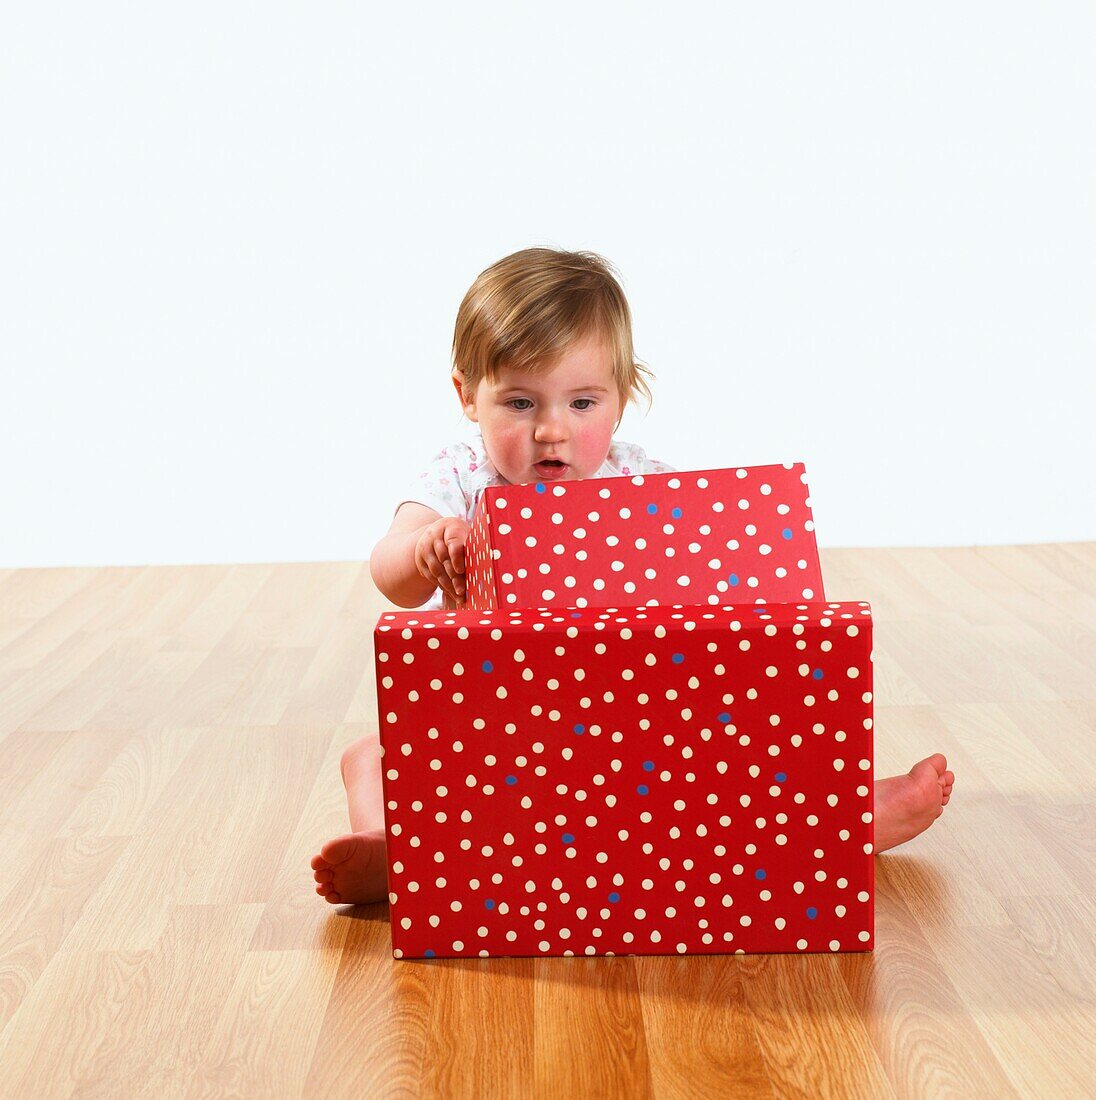 Baby girl sitting on wooden floor looking inside a box